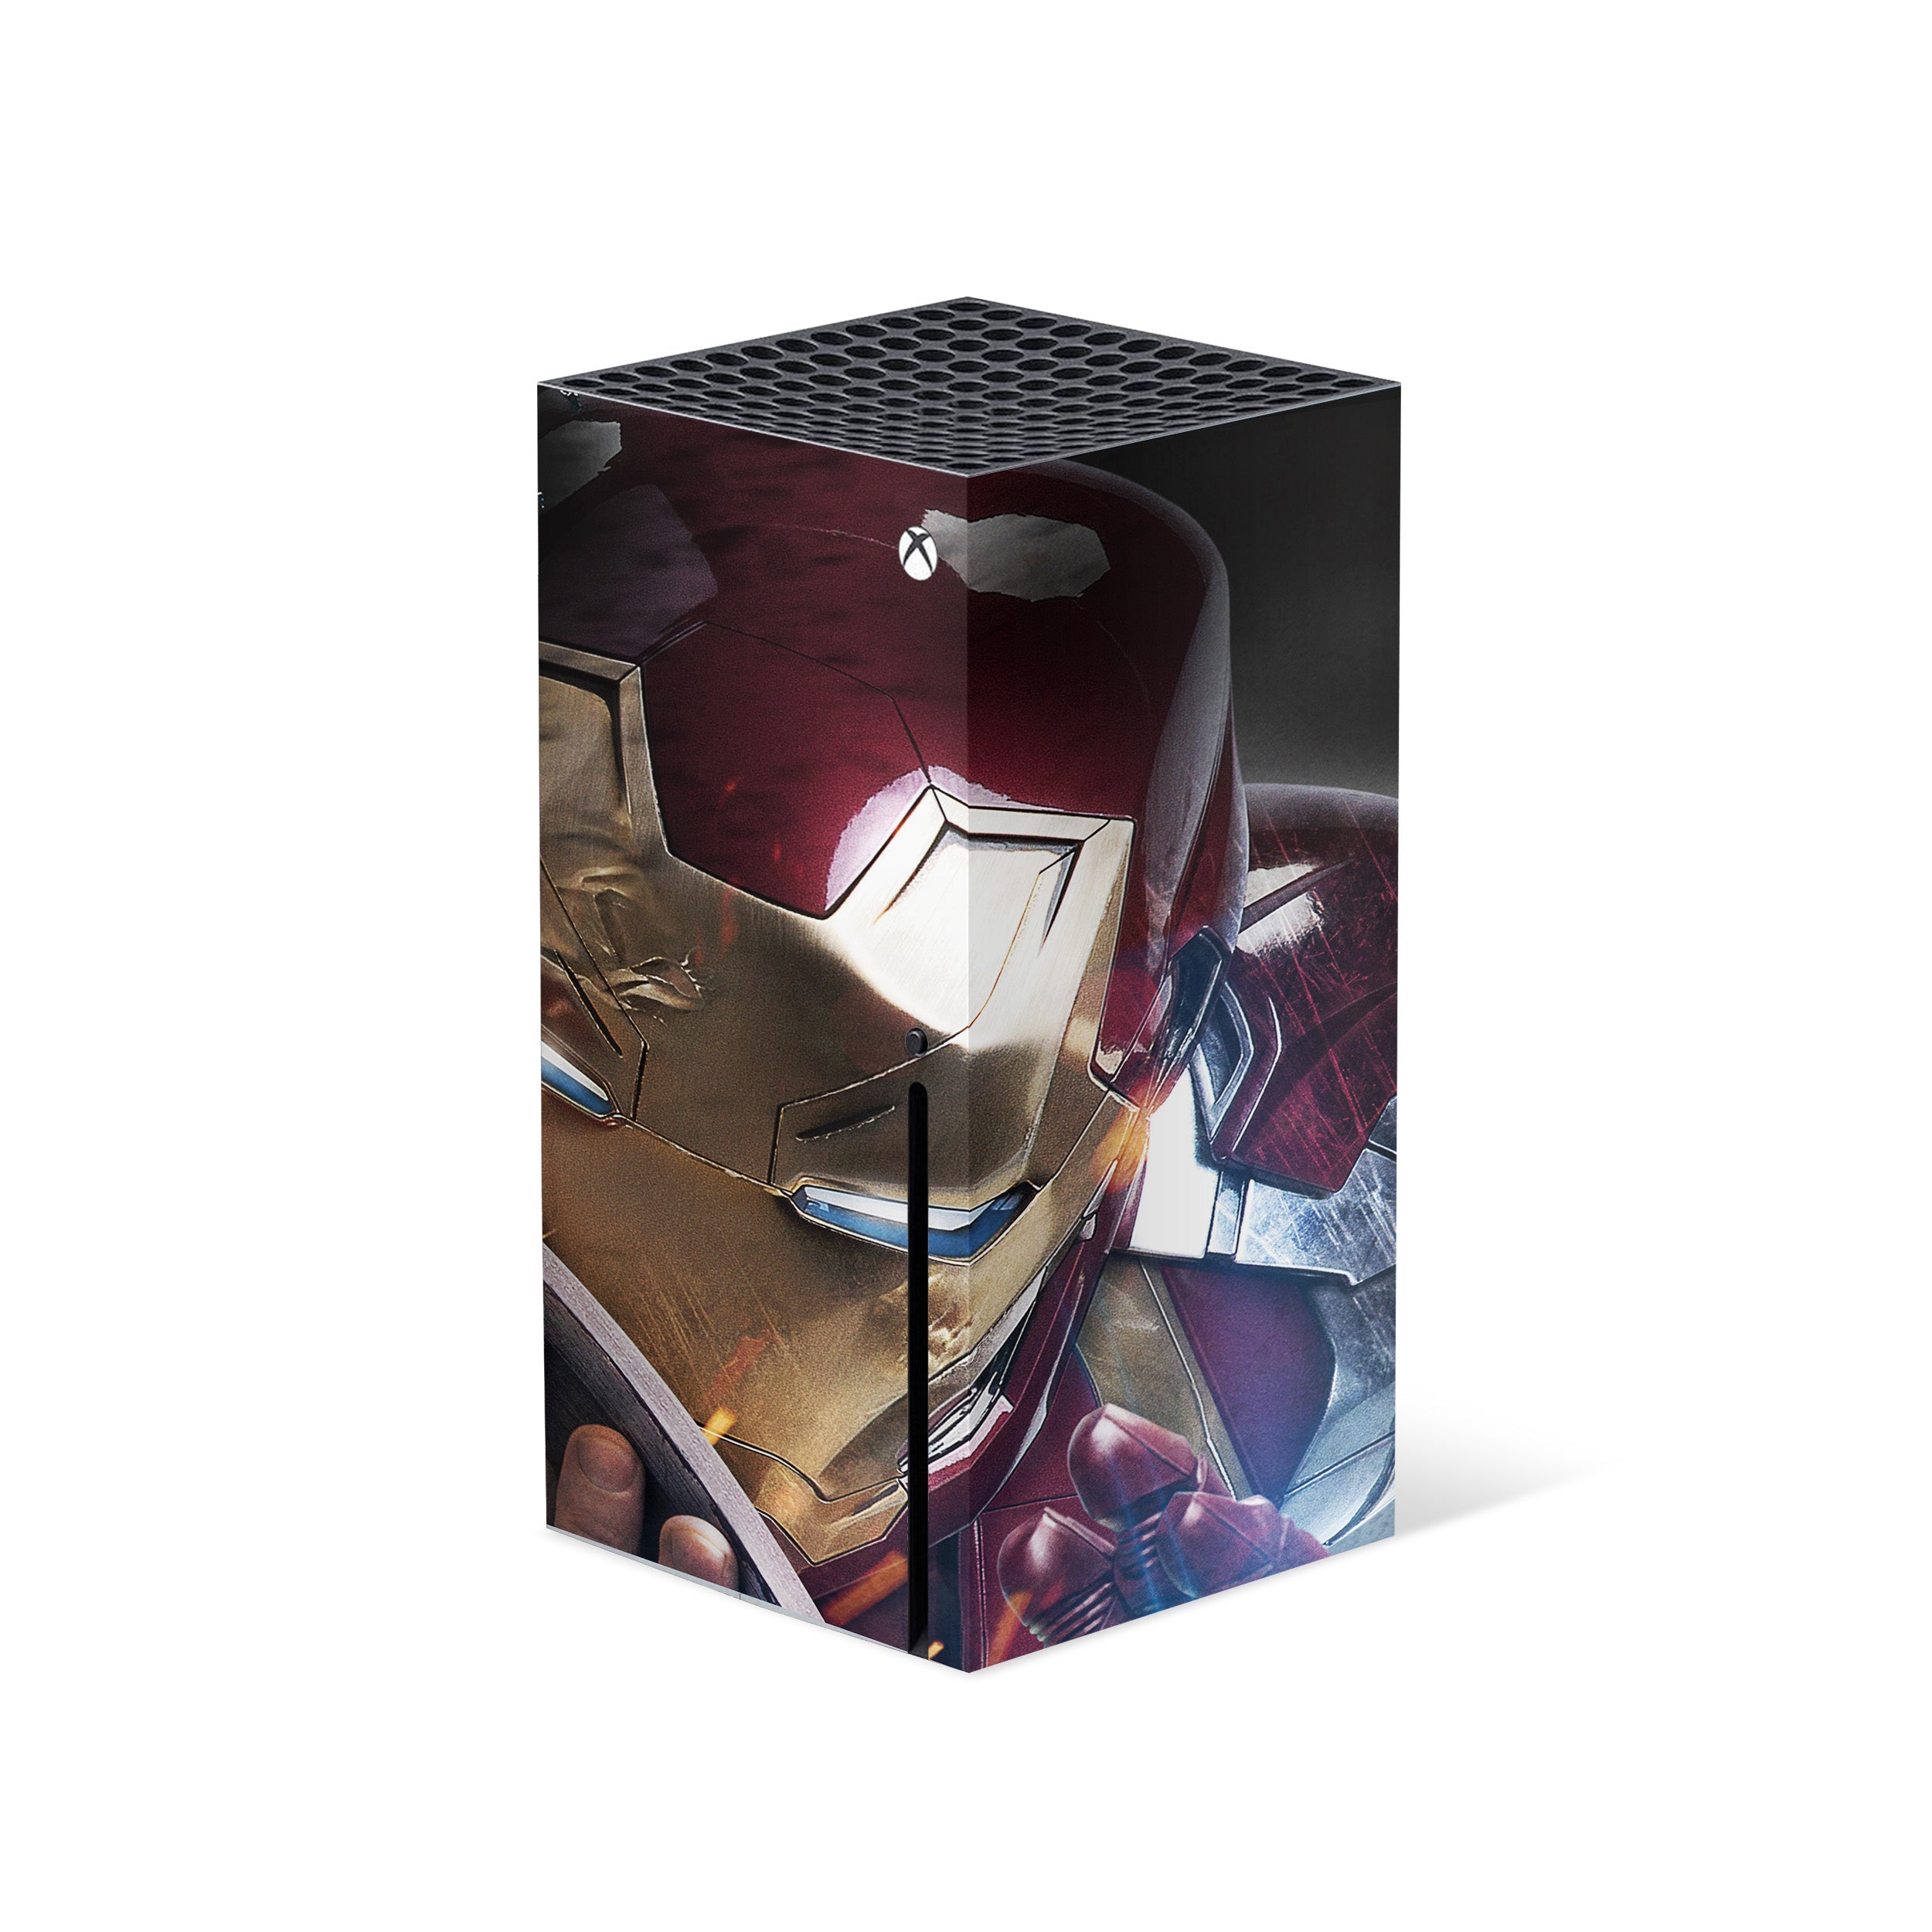 A video game skin featuring a Marvel Iron Man design for the Xbox Series X.